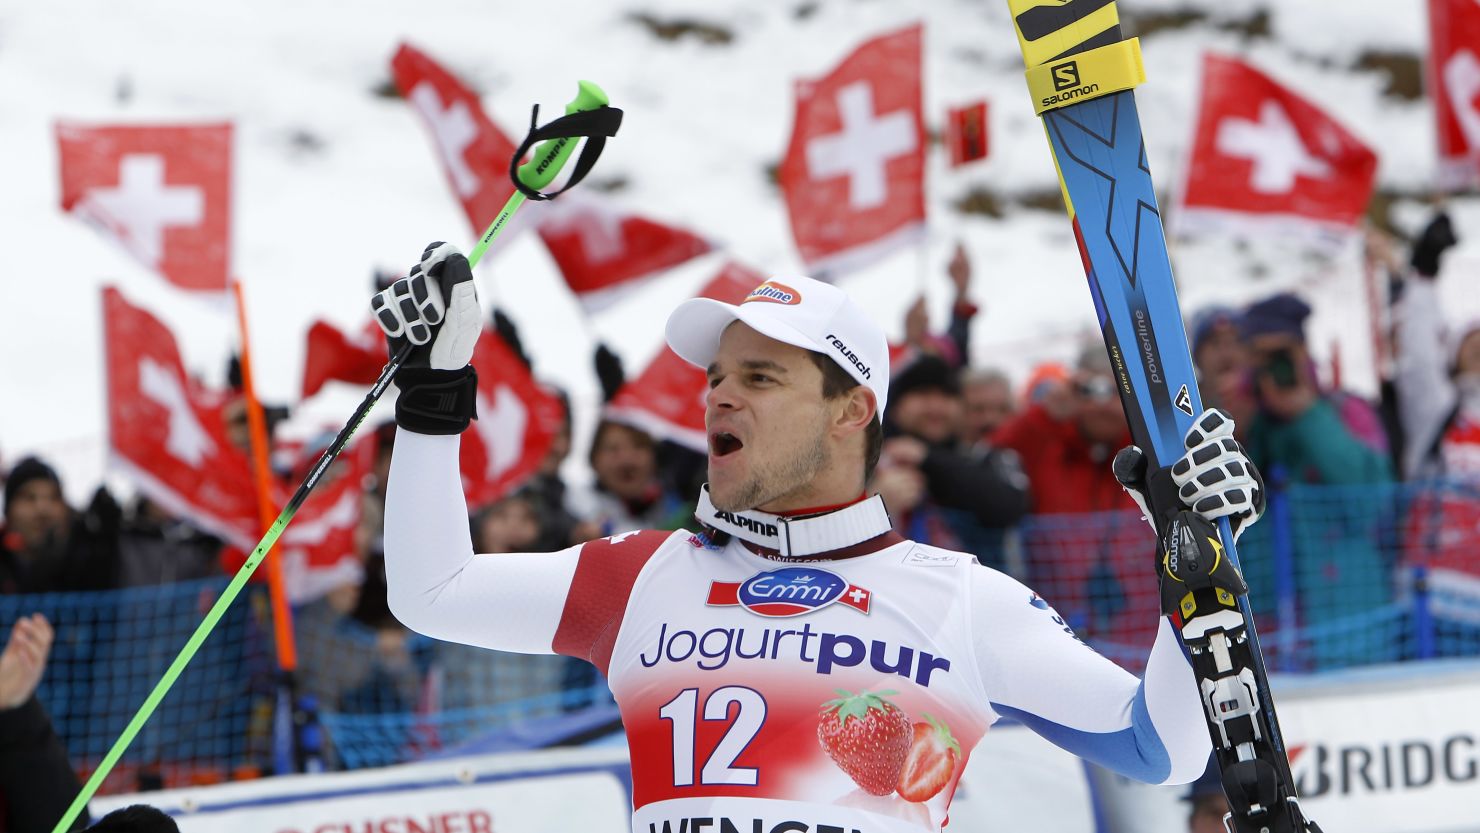 Patrick Kueng of Switzerland has his sights set on his first Winter Olympics in Sochi.